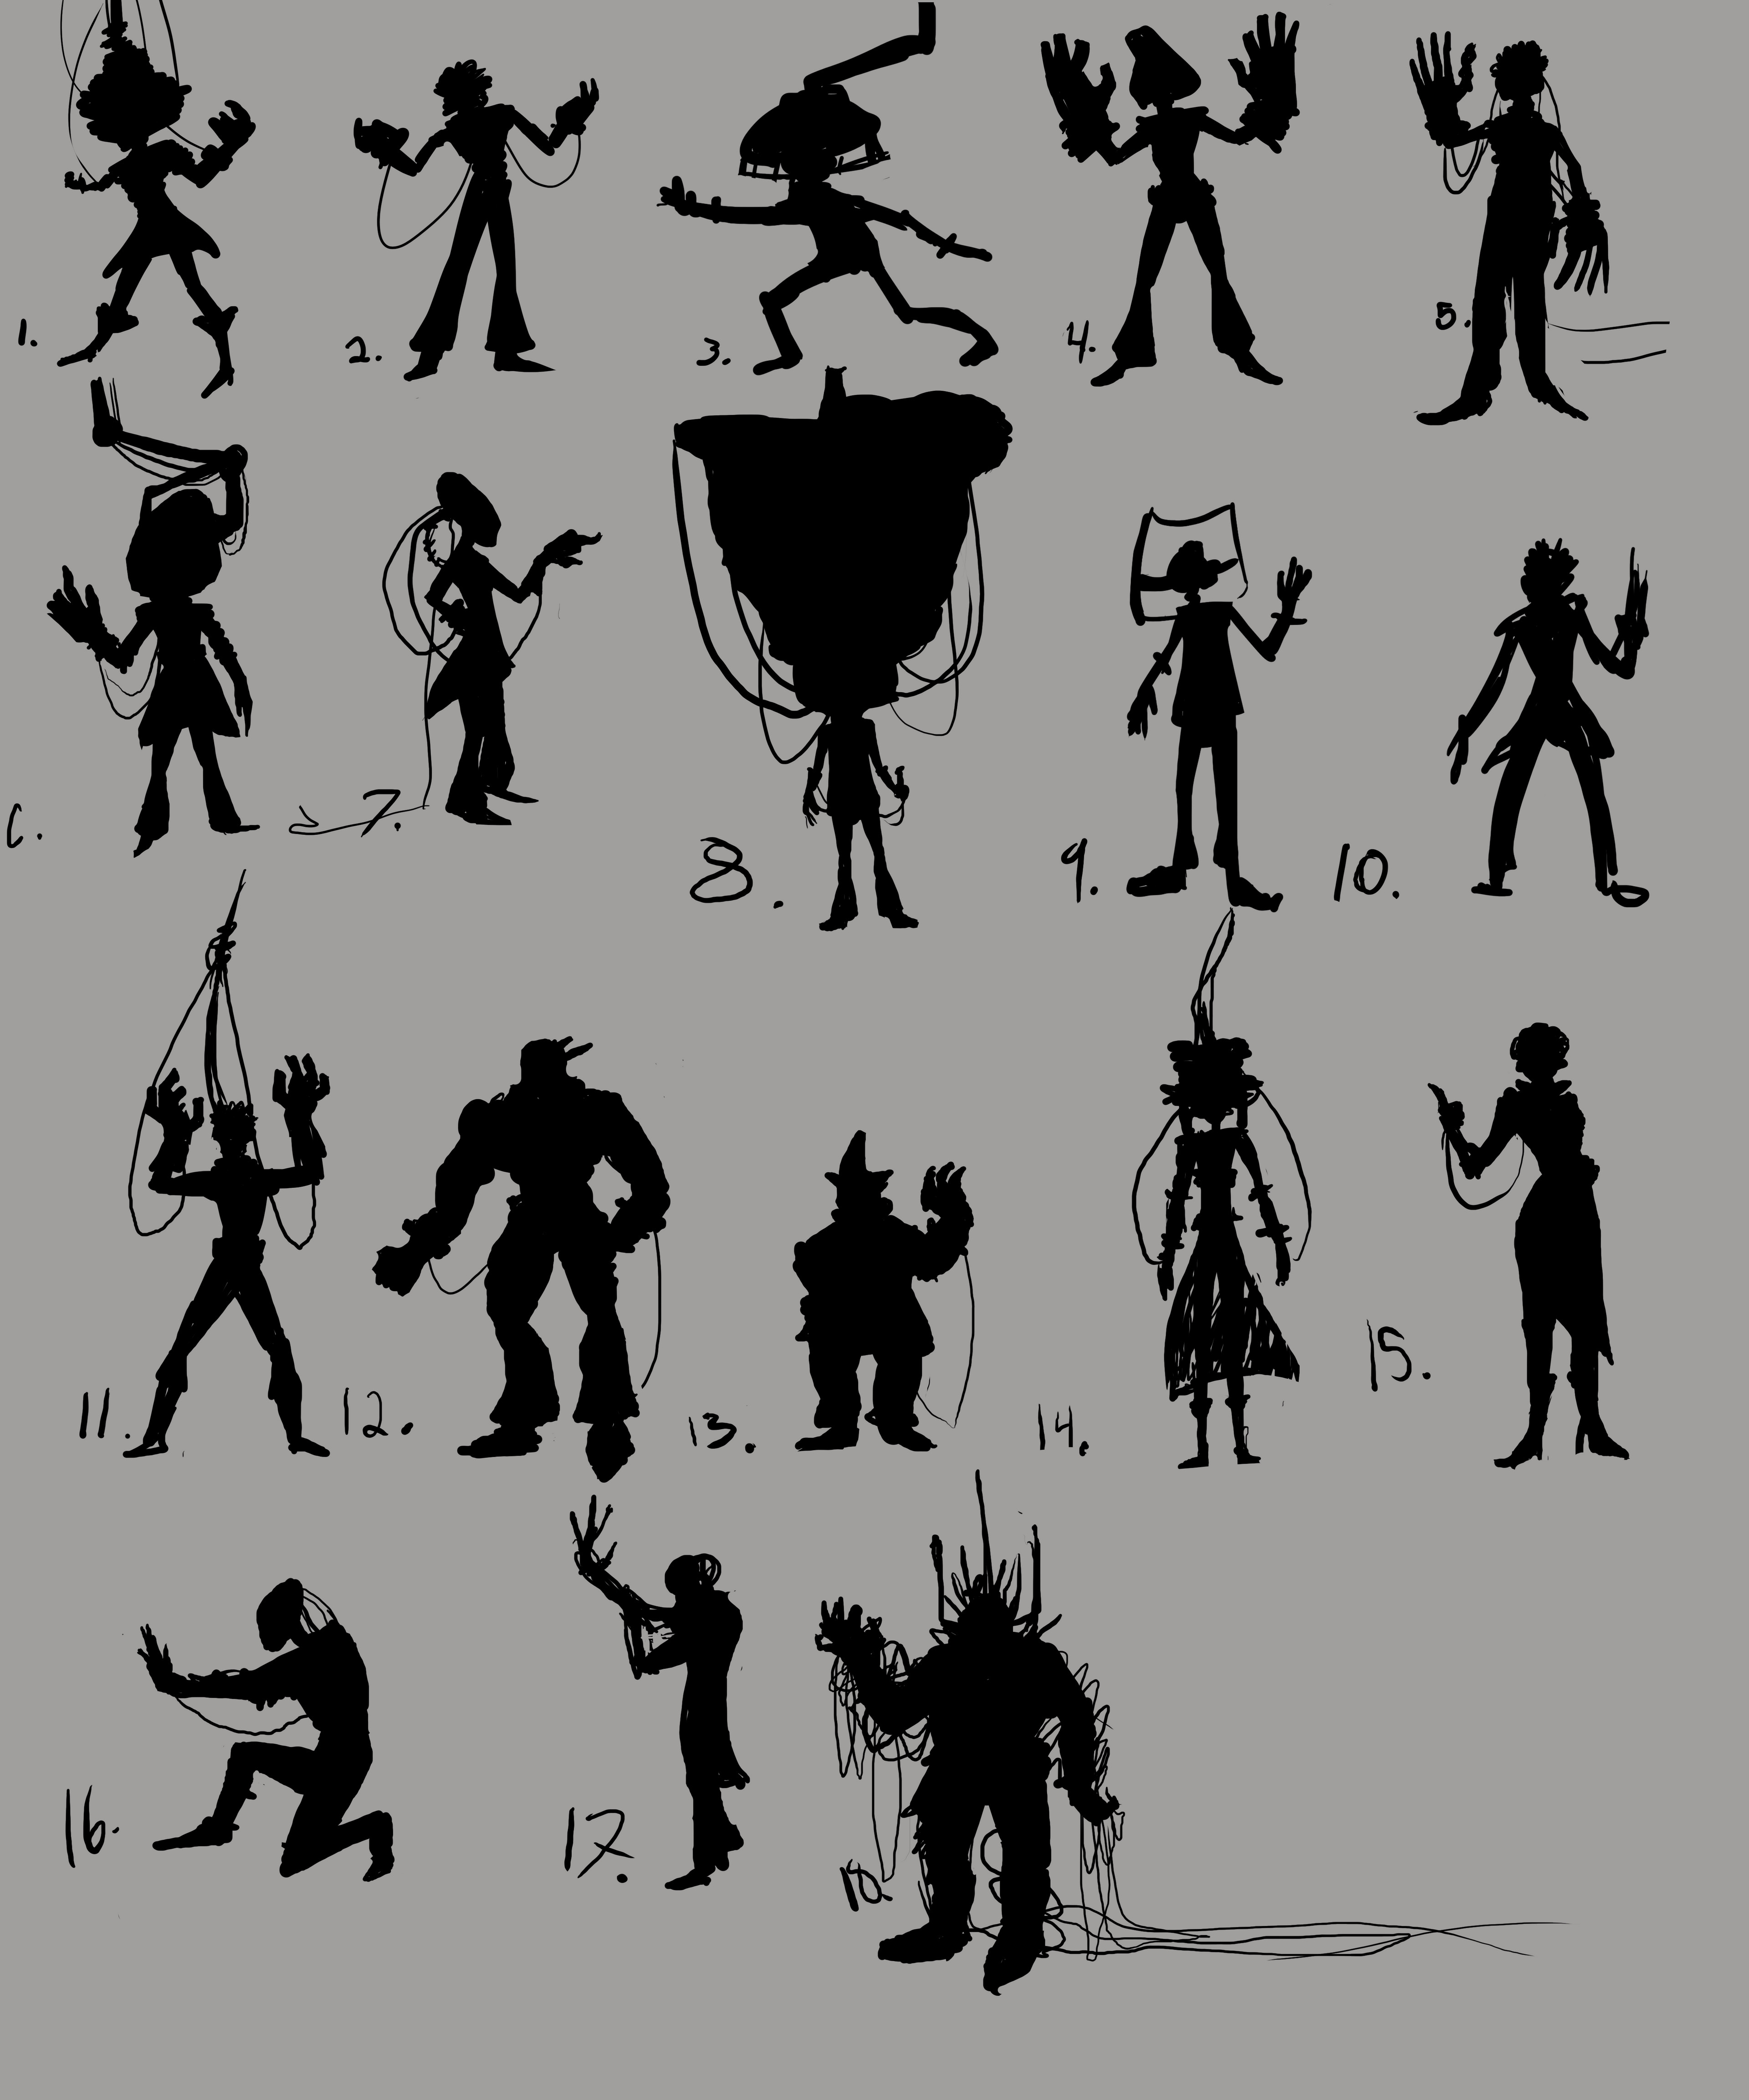 Silhouettes. A few I gave up on half way though and moved on. I ended up choosing #8.